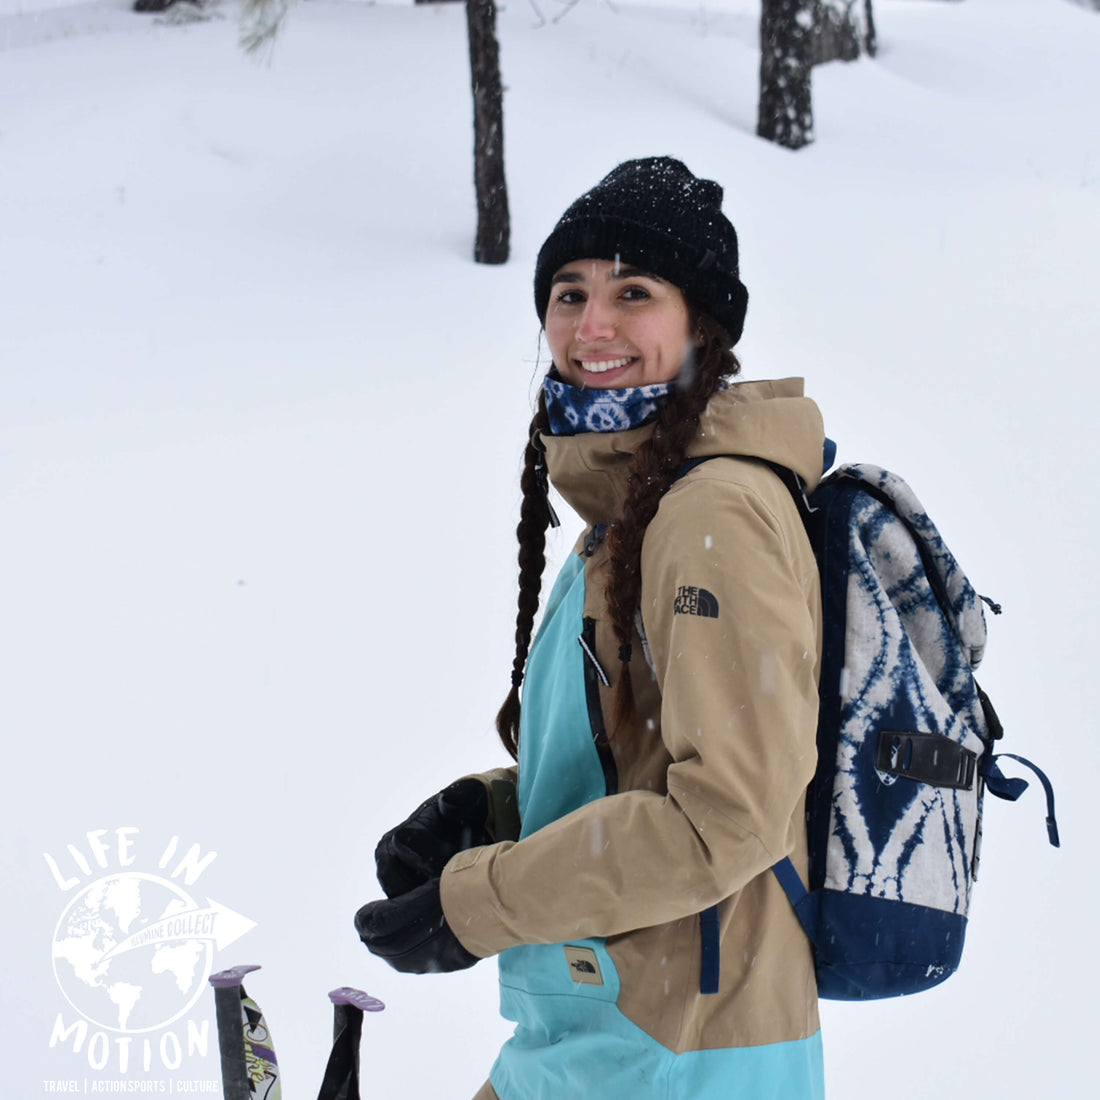 Taking Advantage Of The Resources You Have - Growing up in America's oldest ski shop and giving back to the outdoors with Phebe Lahout of Seirus Outdoor Gear